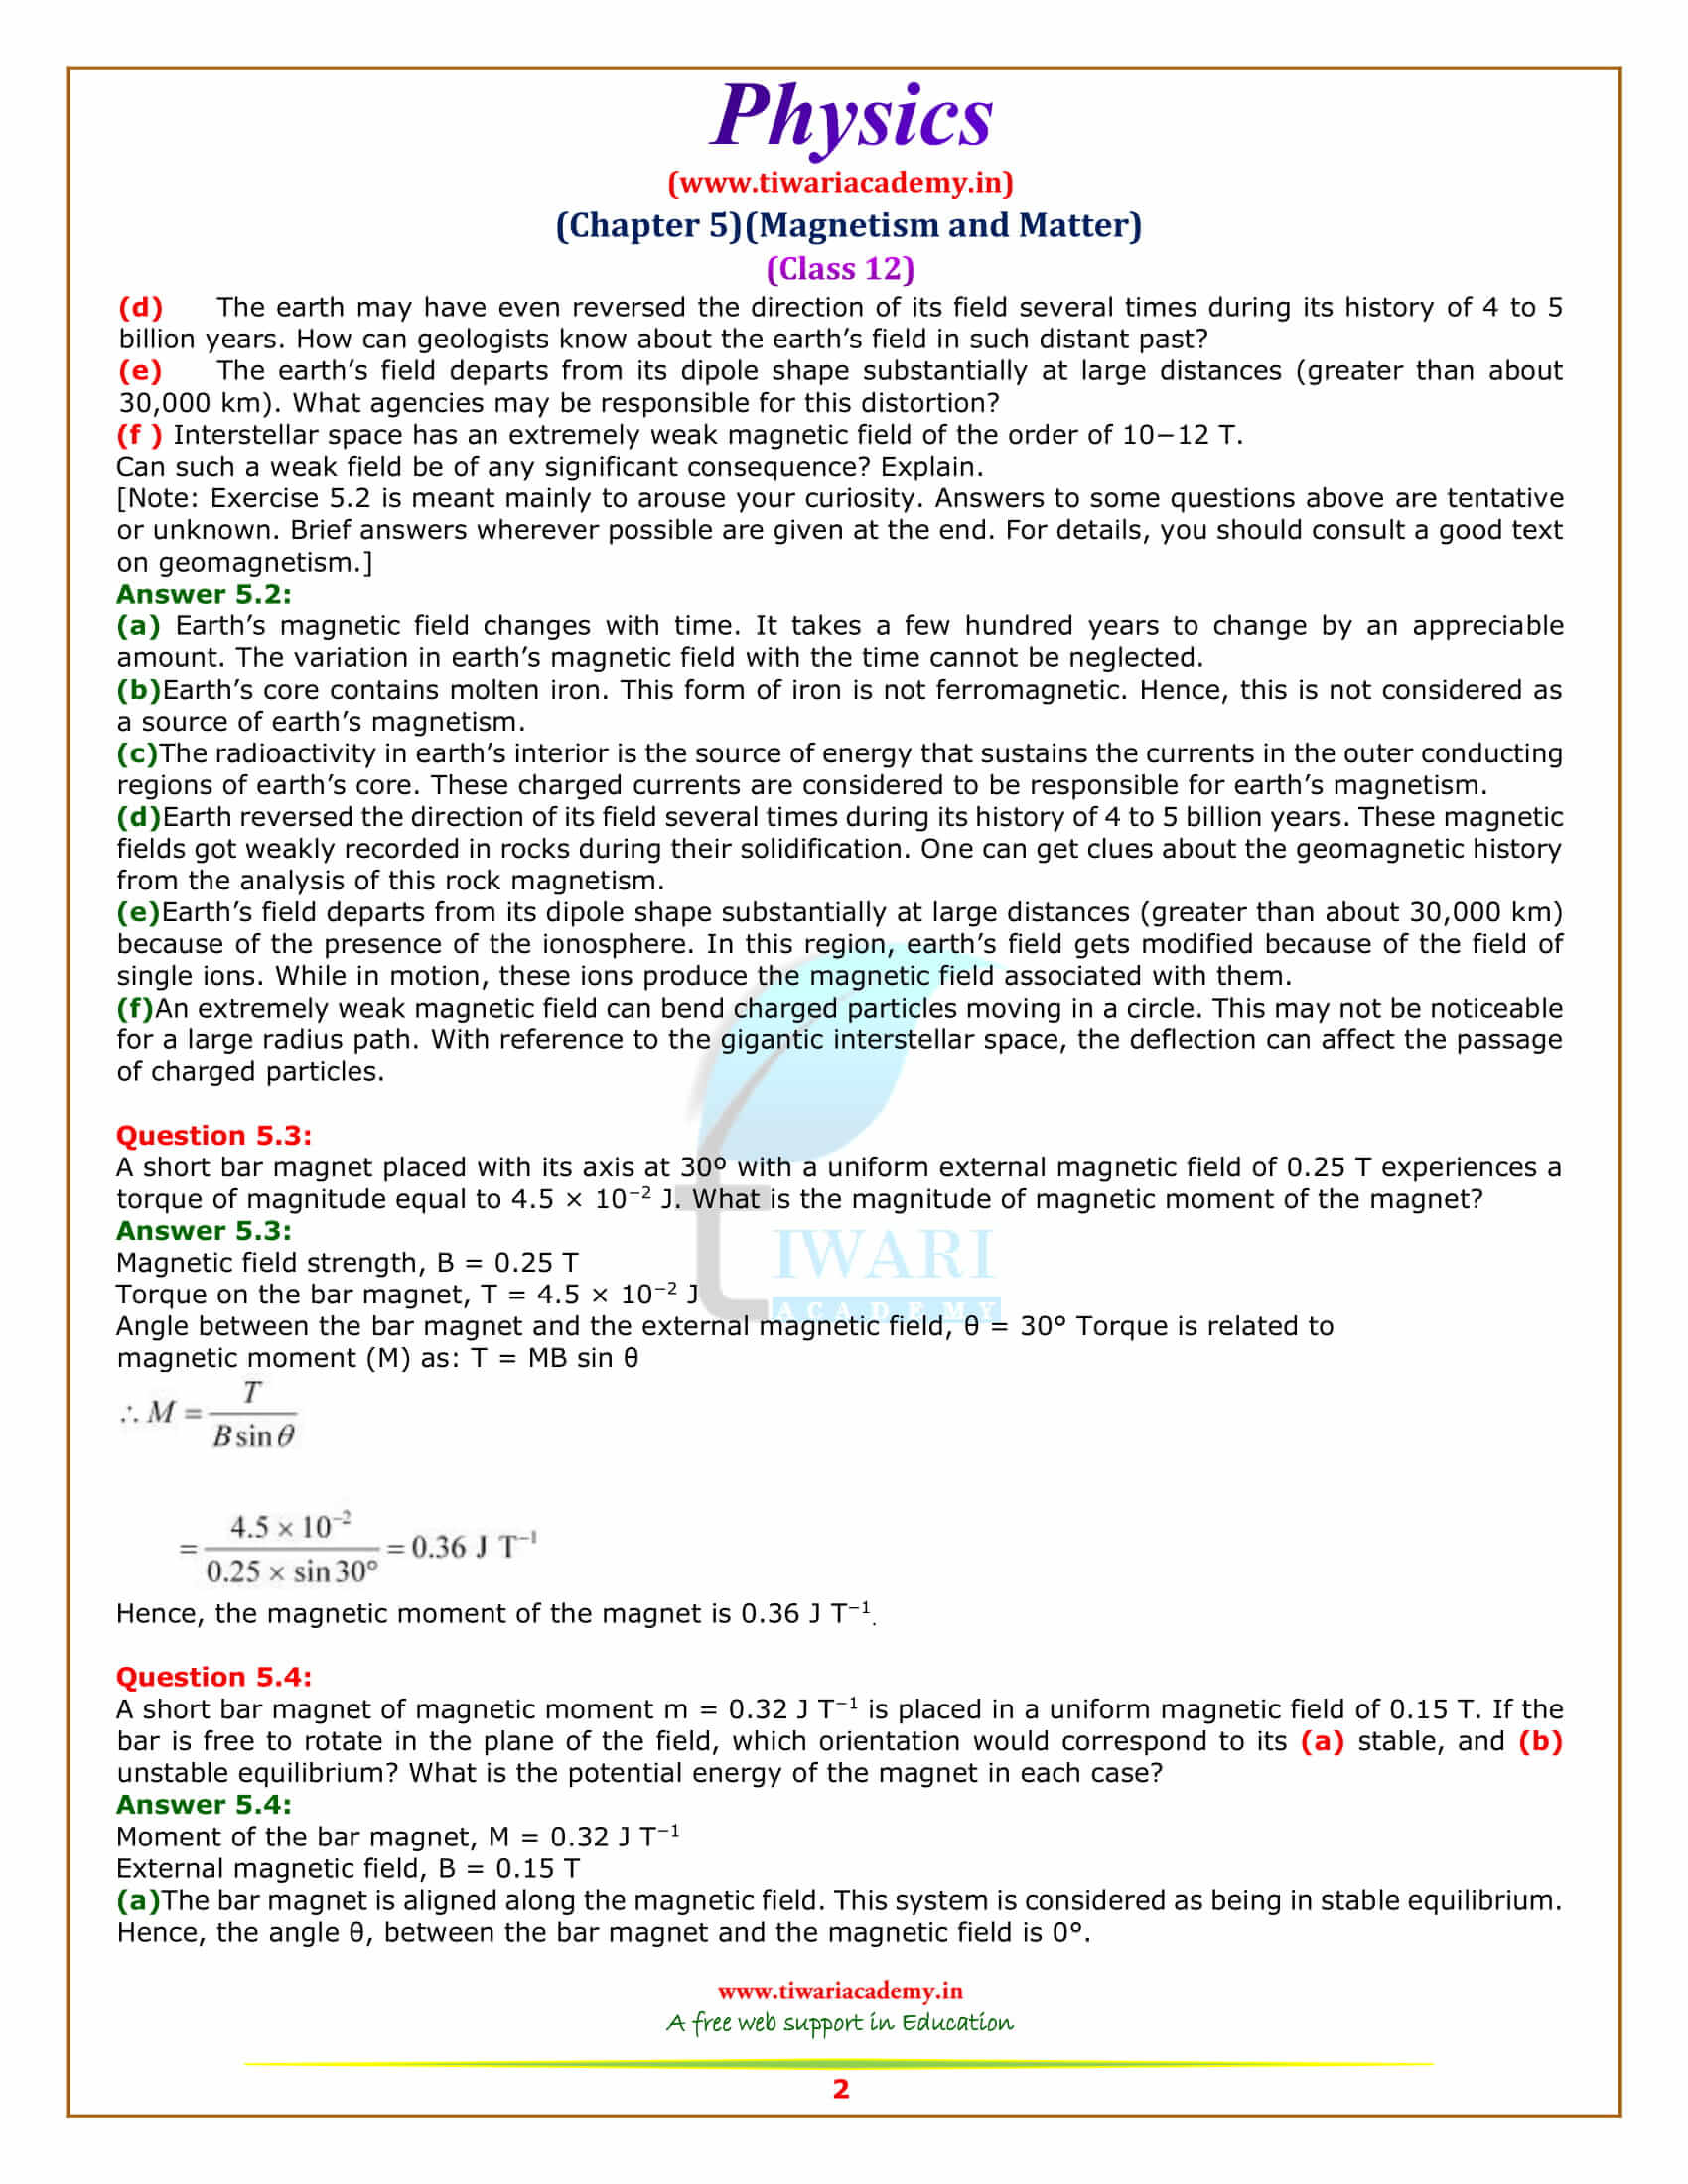 NCERT Solutions for Class 12 Physics Chapter 5 Magnetism and Matter in pdf form